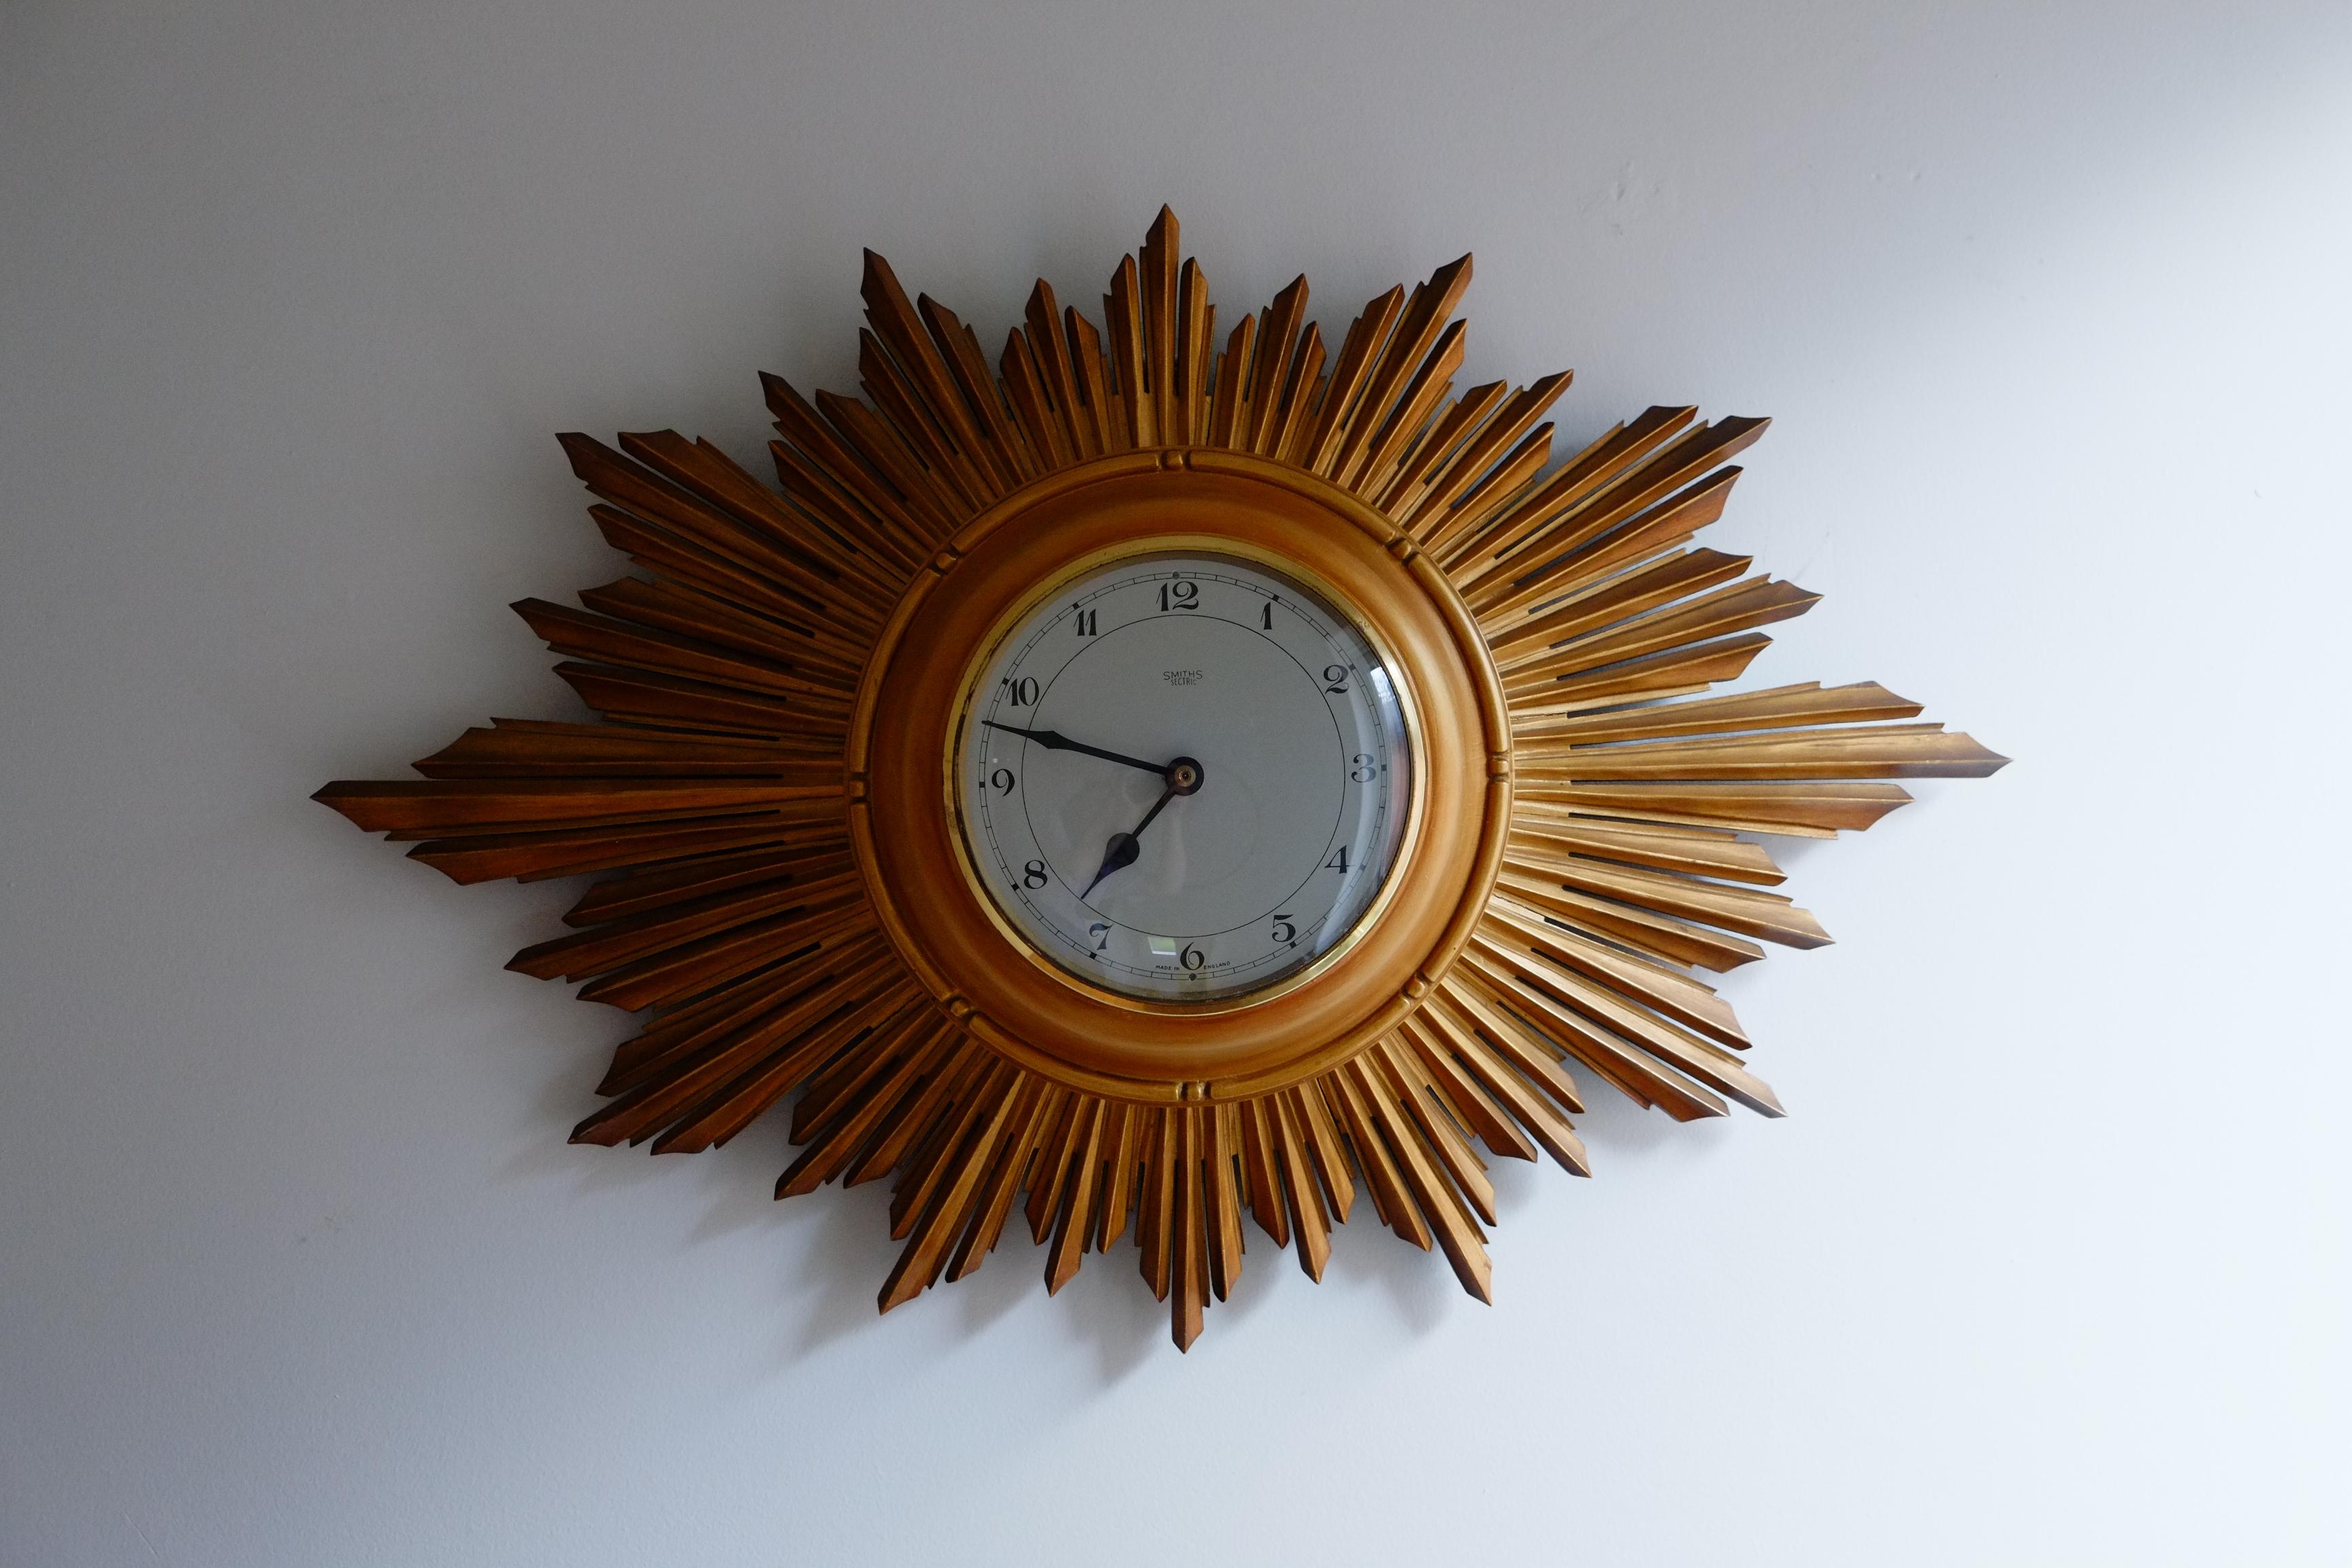 Beautiful 1960s or 70s mid-century wall clock by Smiths clock makers. This rare clock has a stunning large golden oval shaped sunburst, hand carved from wood and a simple aluminium clock face. Made in England. This piece has a particularly elegant